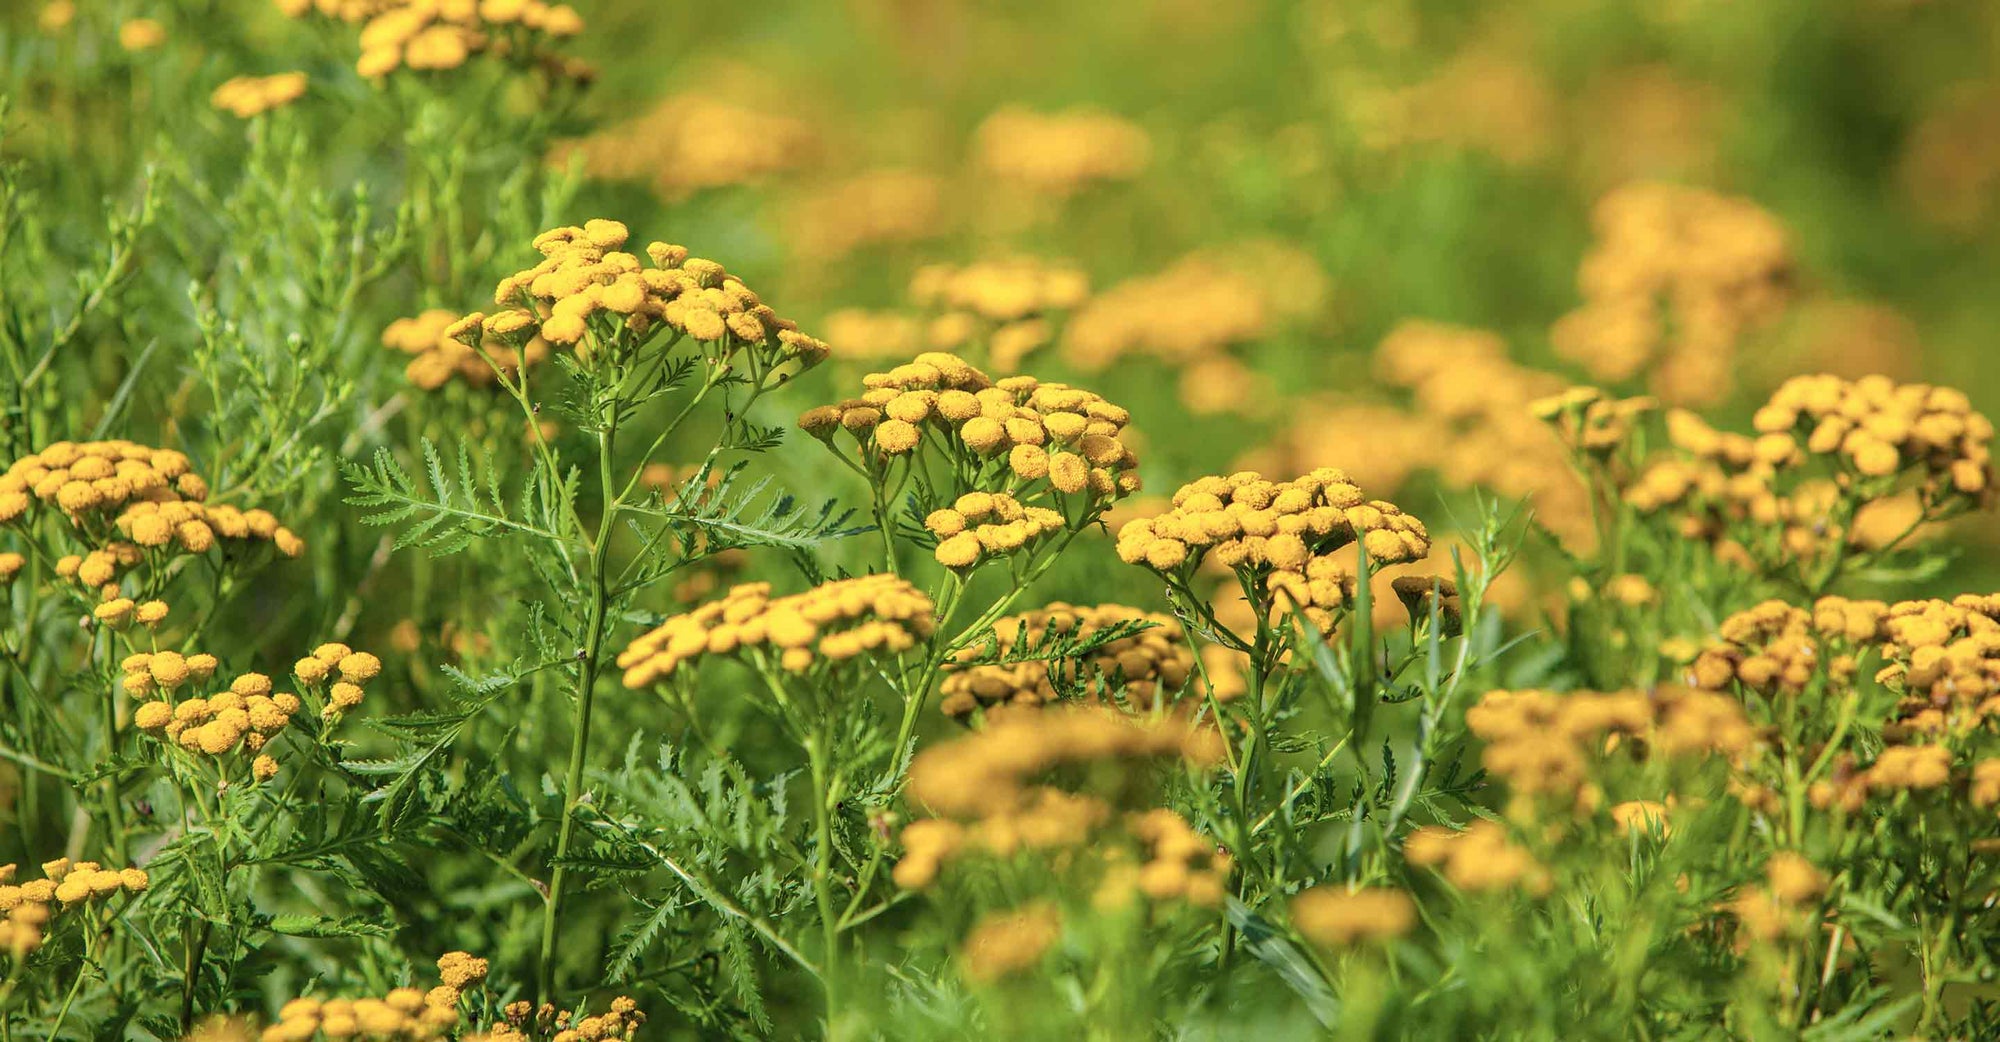 6 Steps you can take to control ragweed allergies